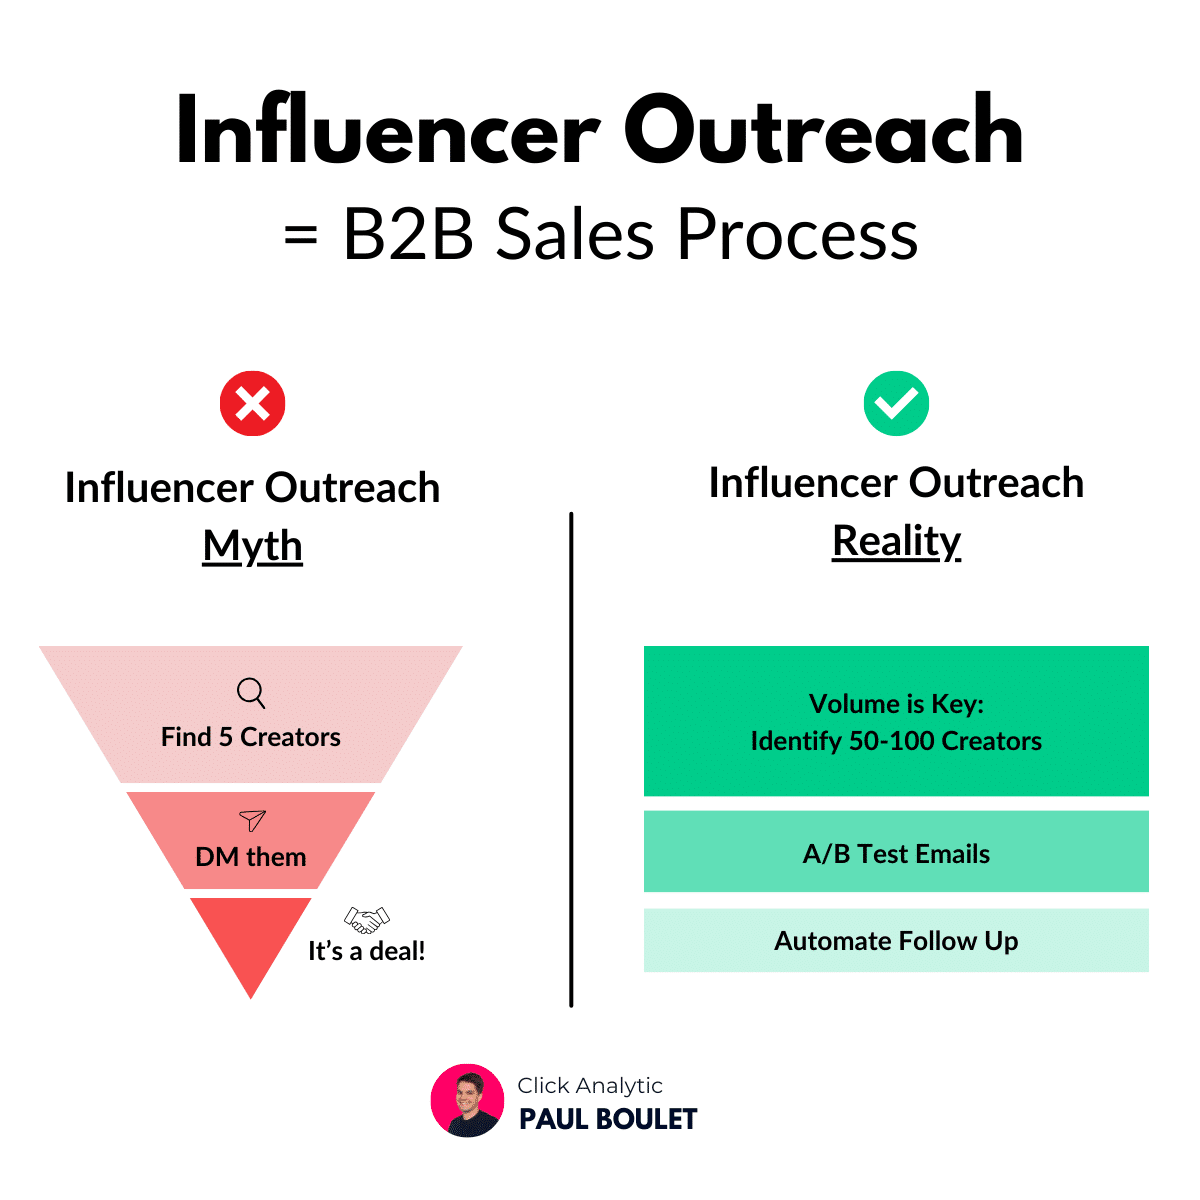 Graphic comparing ineffective and effective B2B sales processes in influencer marketing outreach, highlighting strategies from finding creators to finalizing deals.